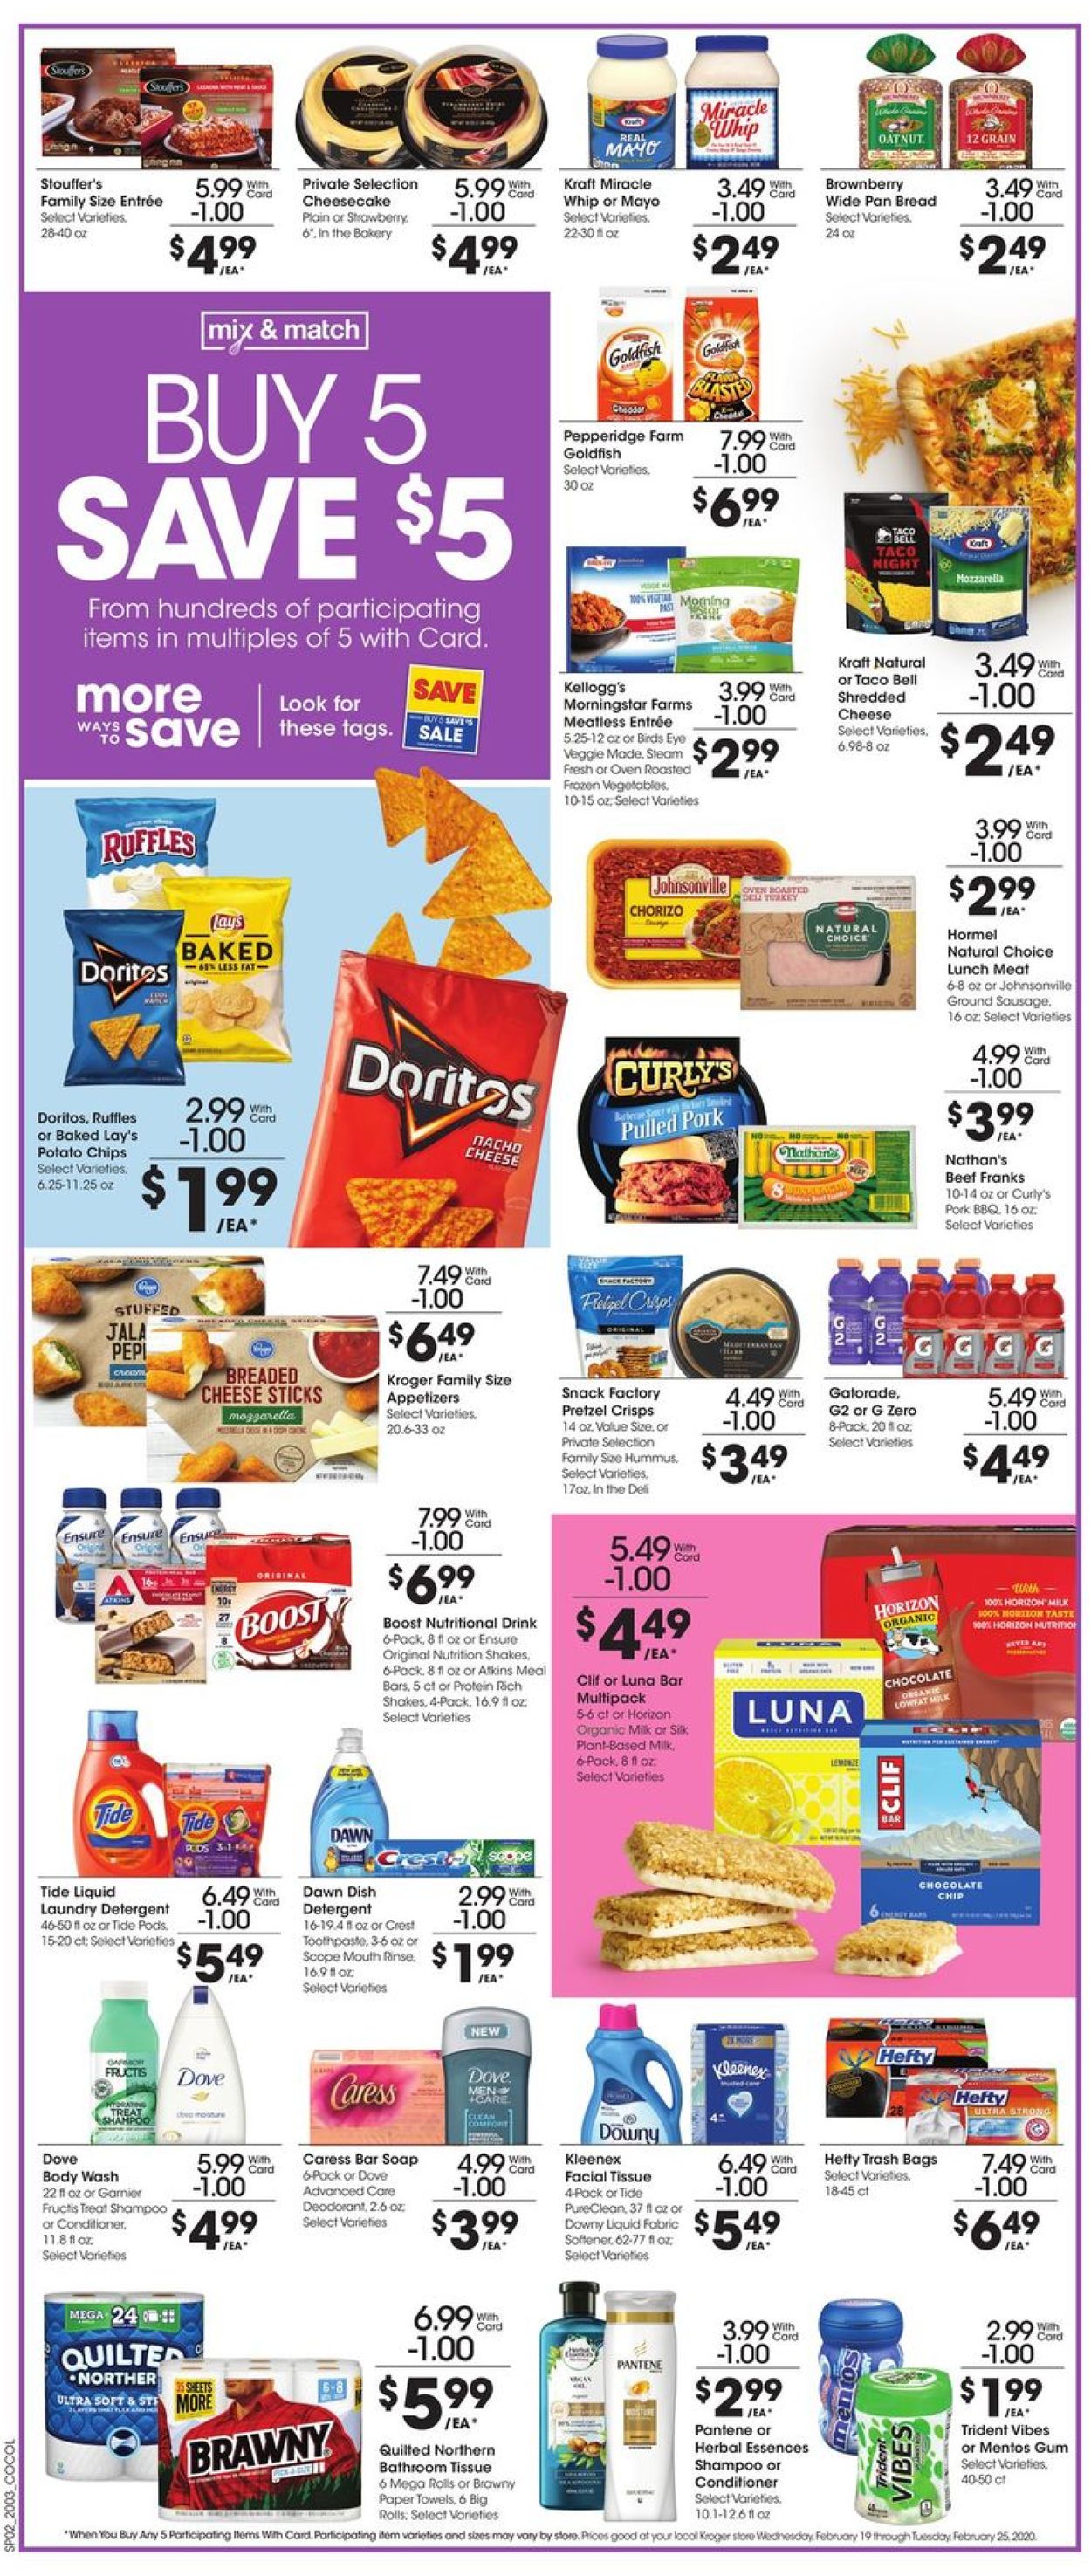 Kroger Ad from 02/19/2020